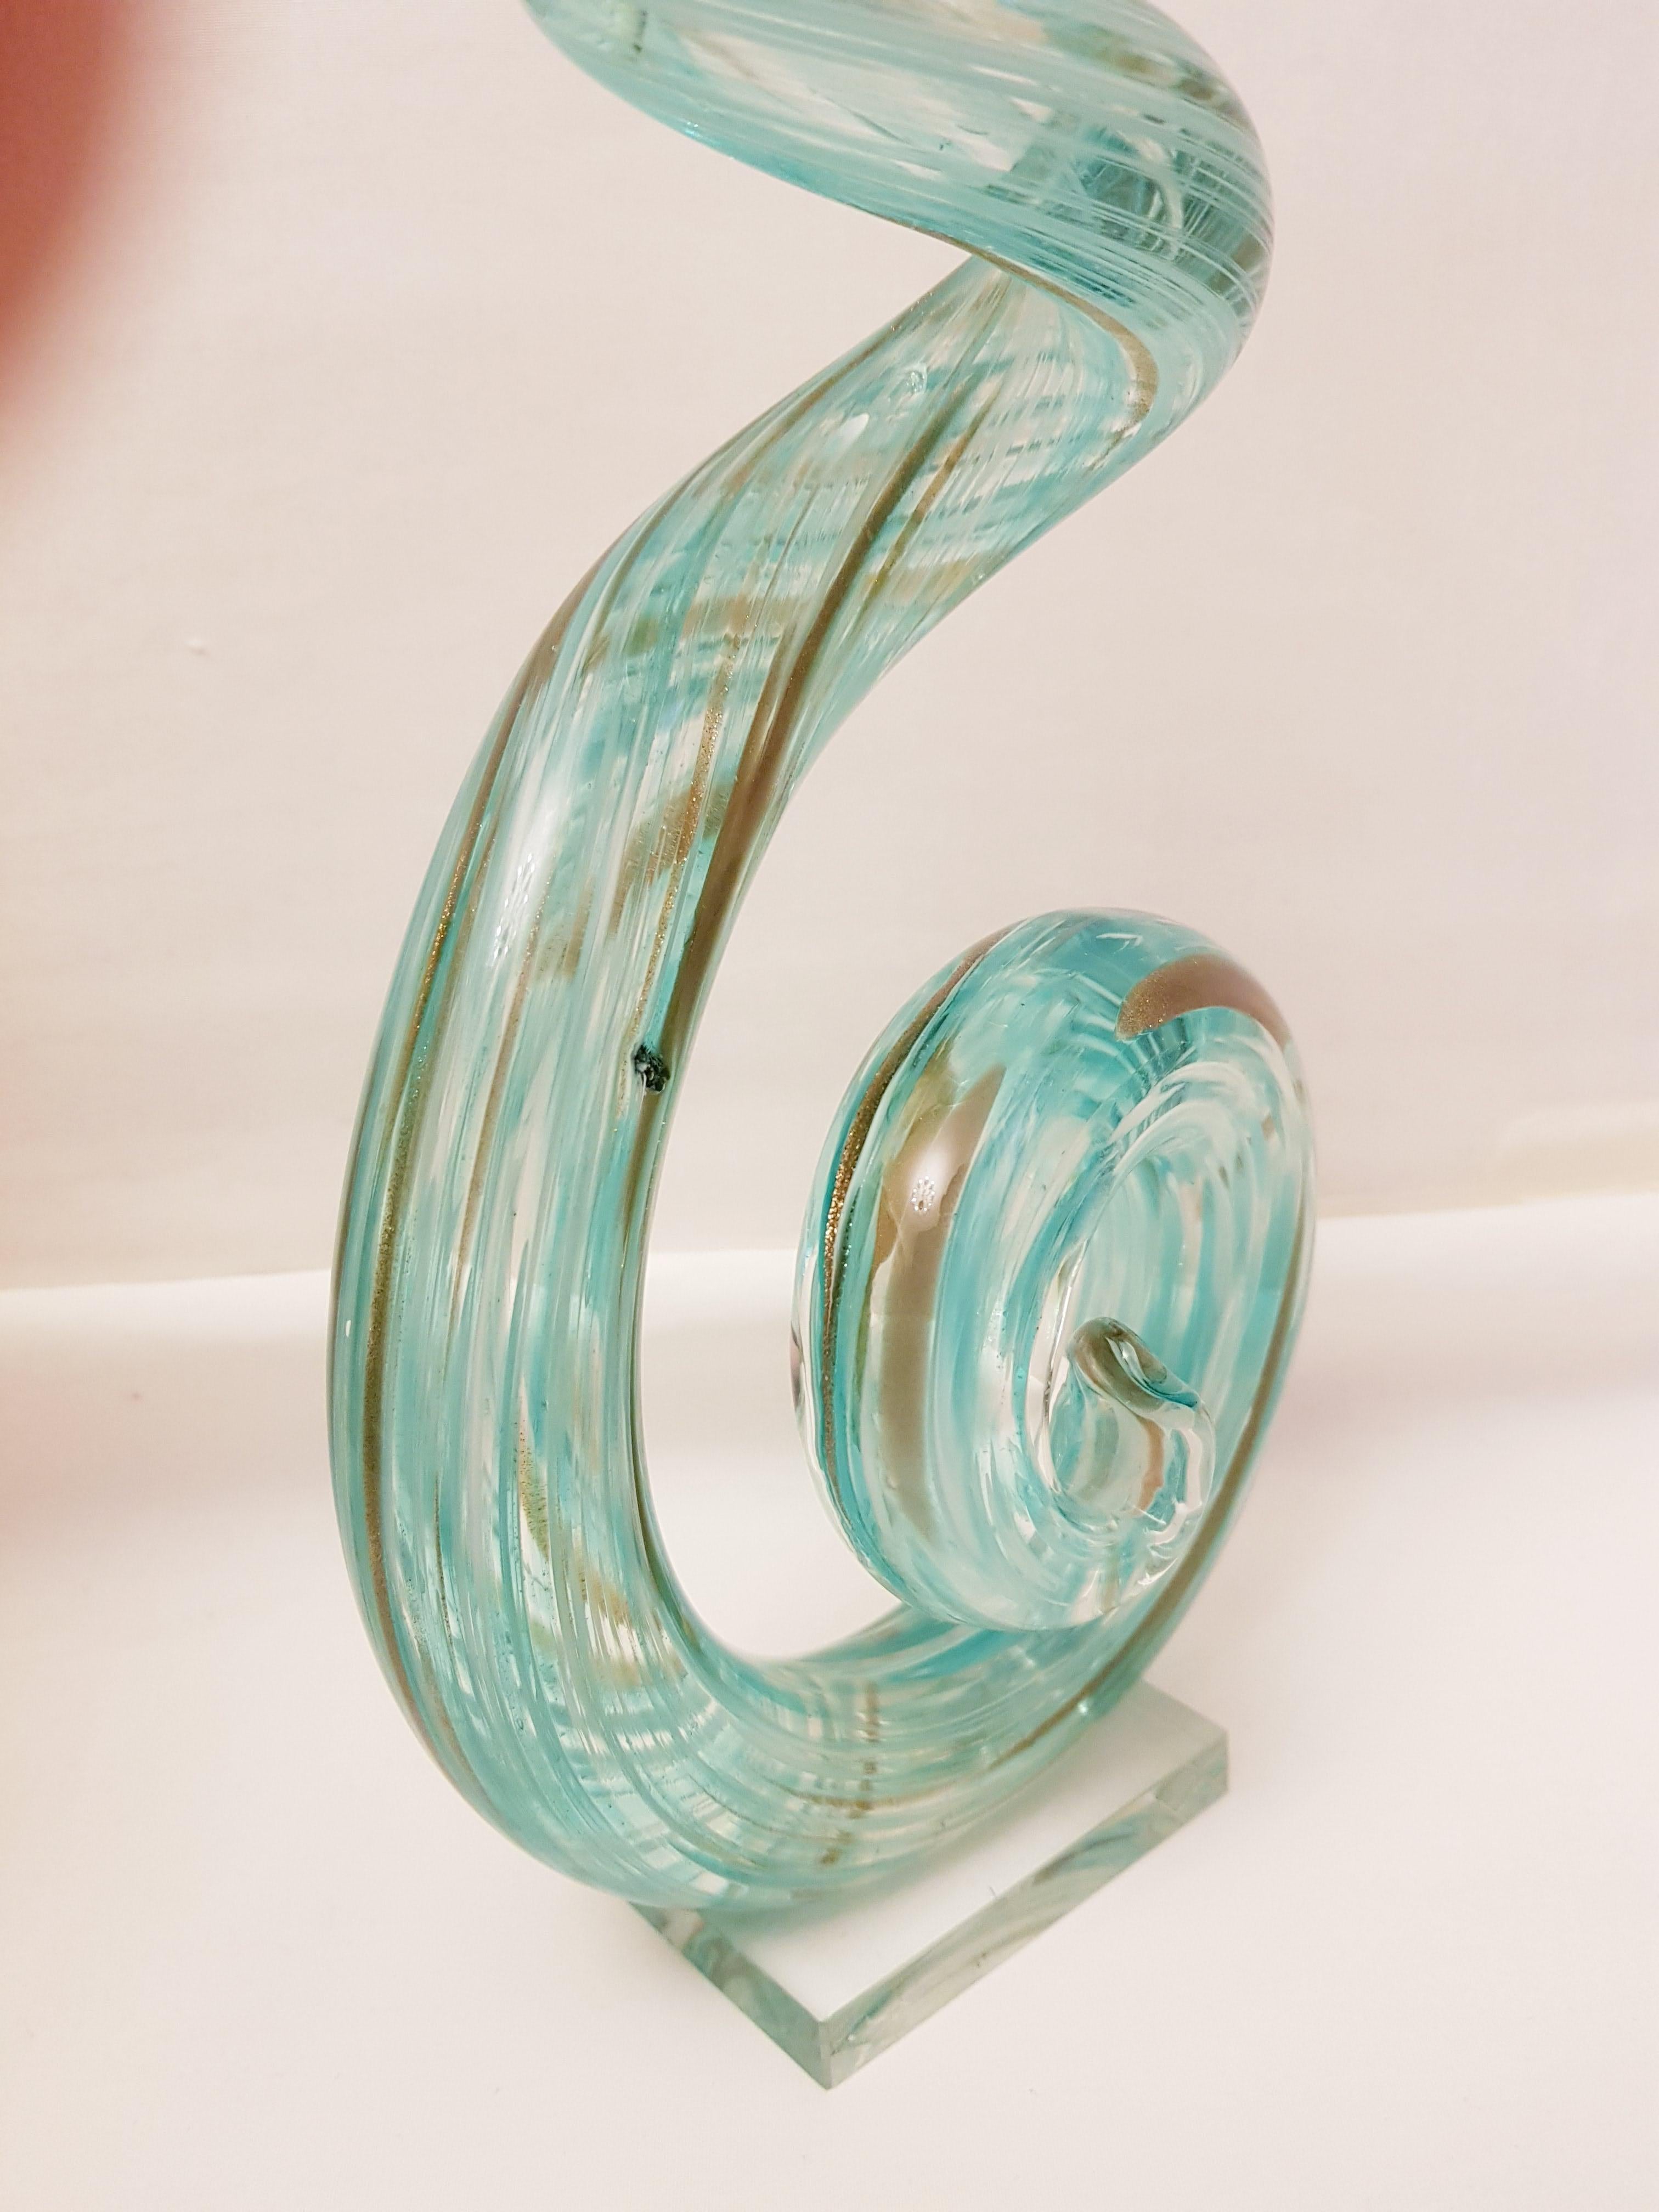 Italian Art Glass Abstract Sculpture with Aventurine For Sale